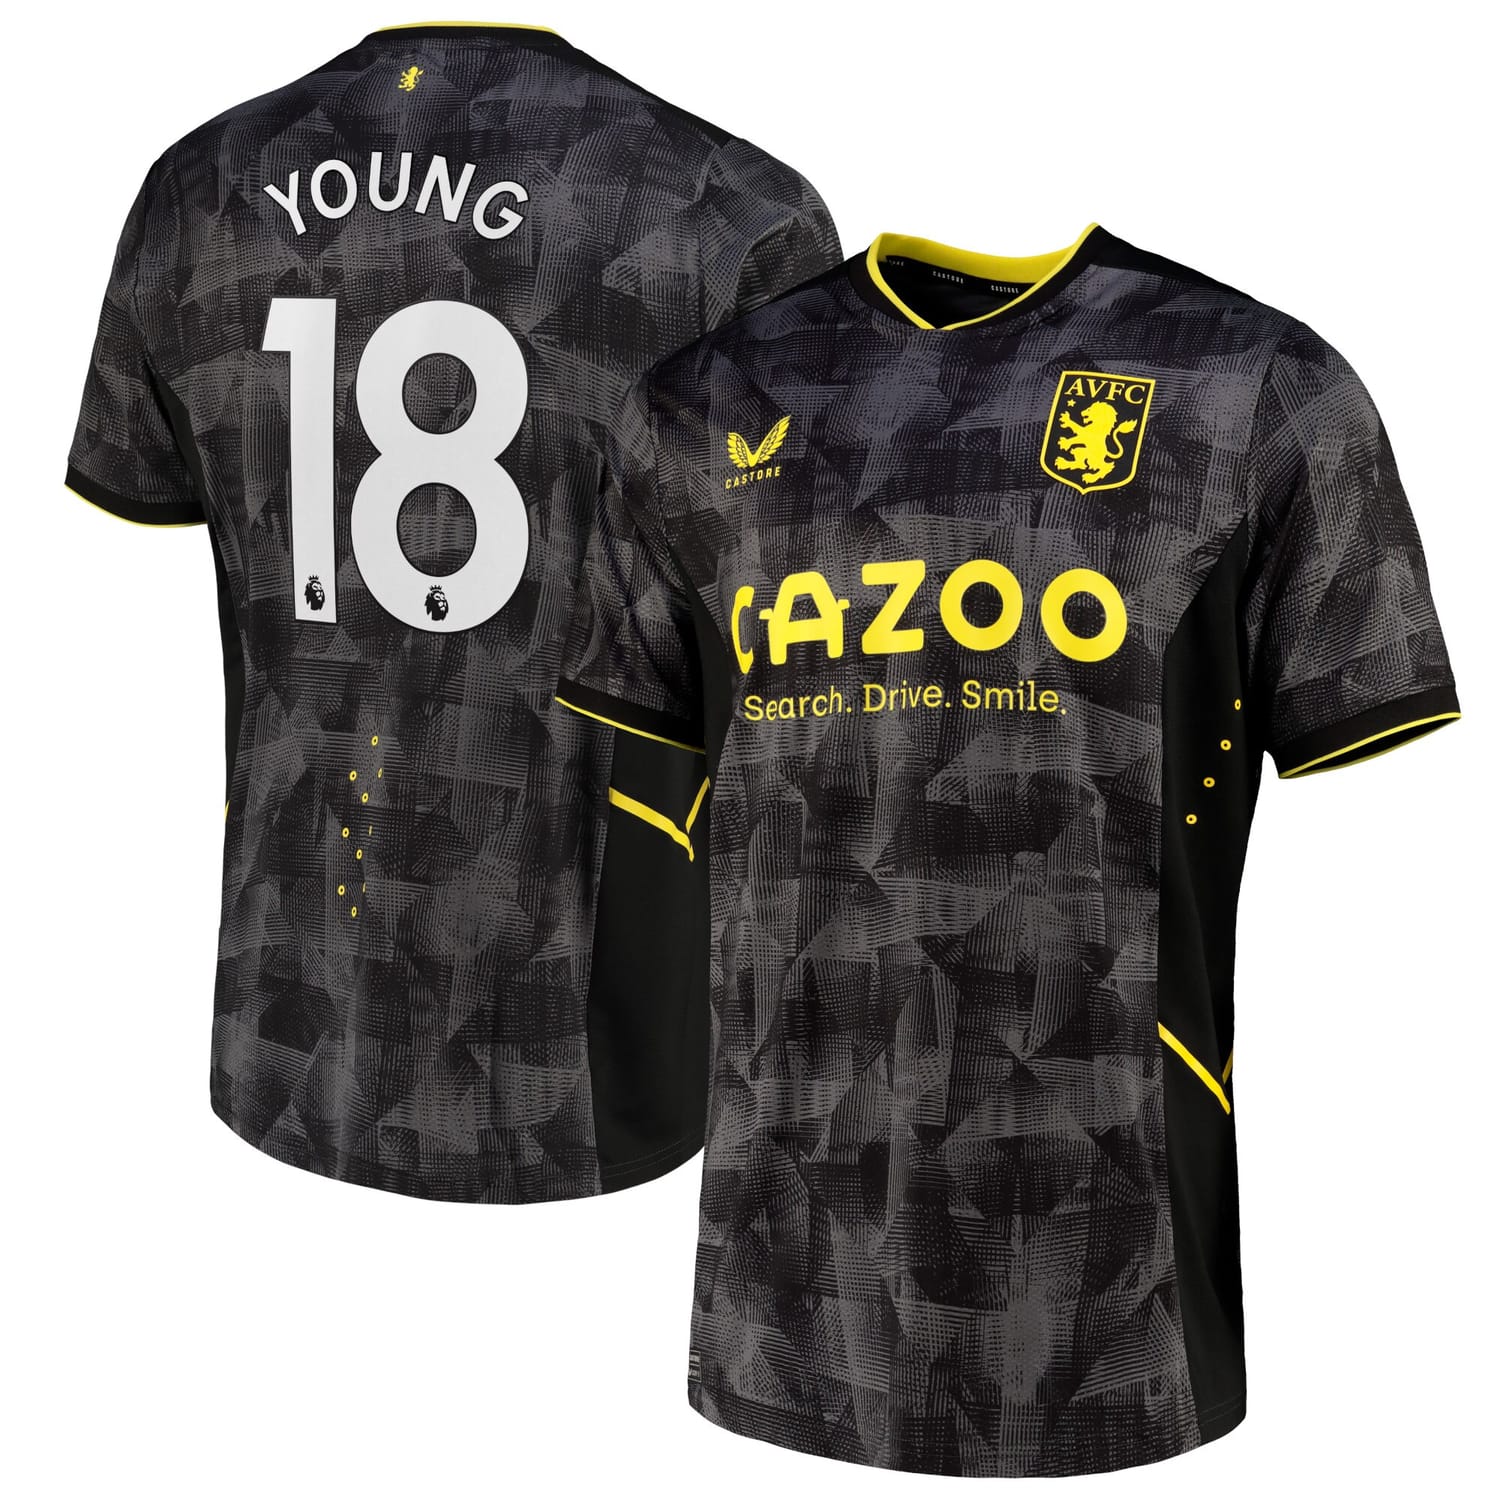 Premier League Ast. Villa Third Pro Jersey Shirt 2022-23 player Ashley Young 18 printing for Men